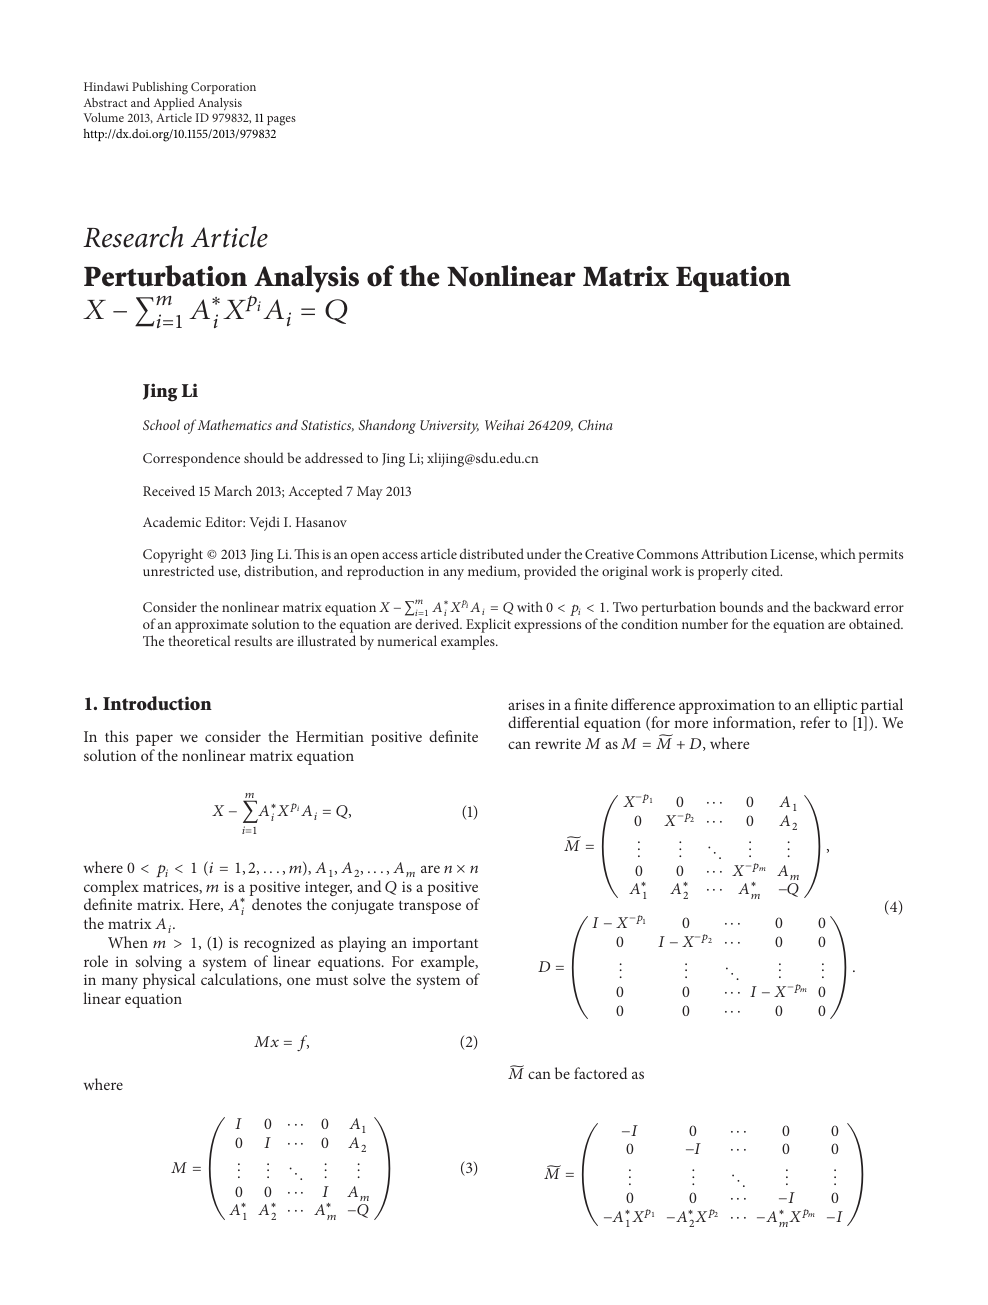 Perturbation Analysis Of The Nonlinear Matrix Equation Topic Of Research Paper In Mathematics Download Scholarly Article Pdf And Read For Free On Cyberleninka Open Science Hub